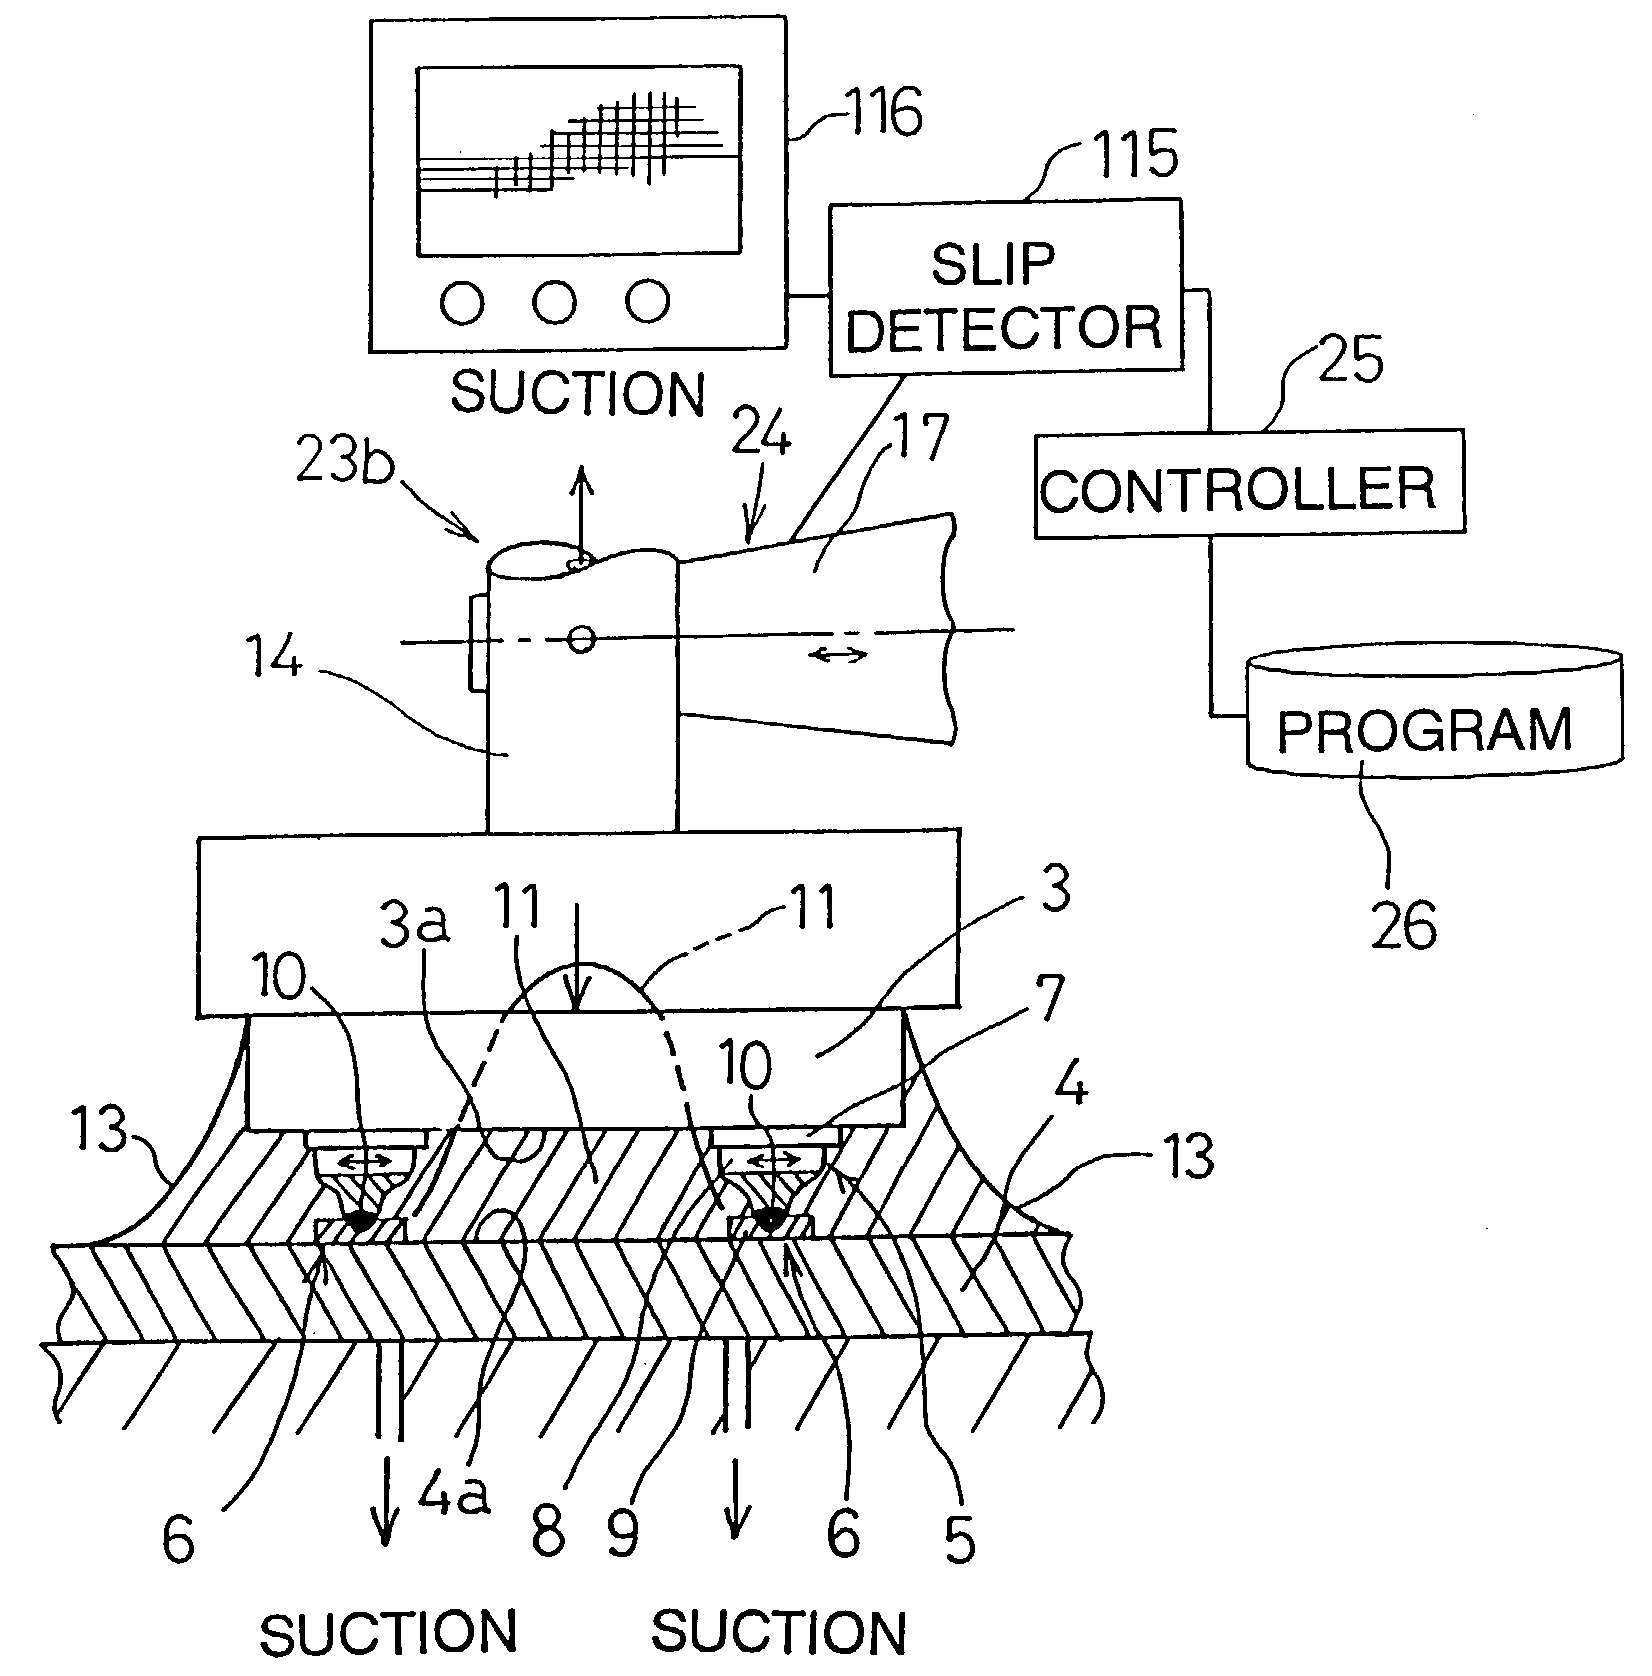 Component mounting apparatus including a polishing device